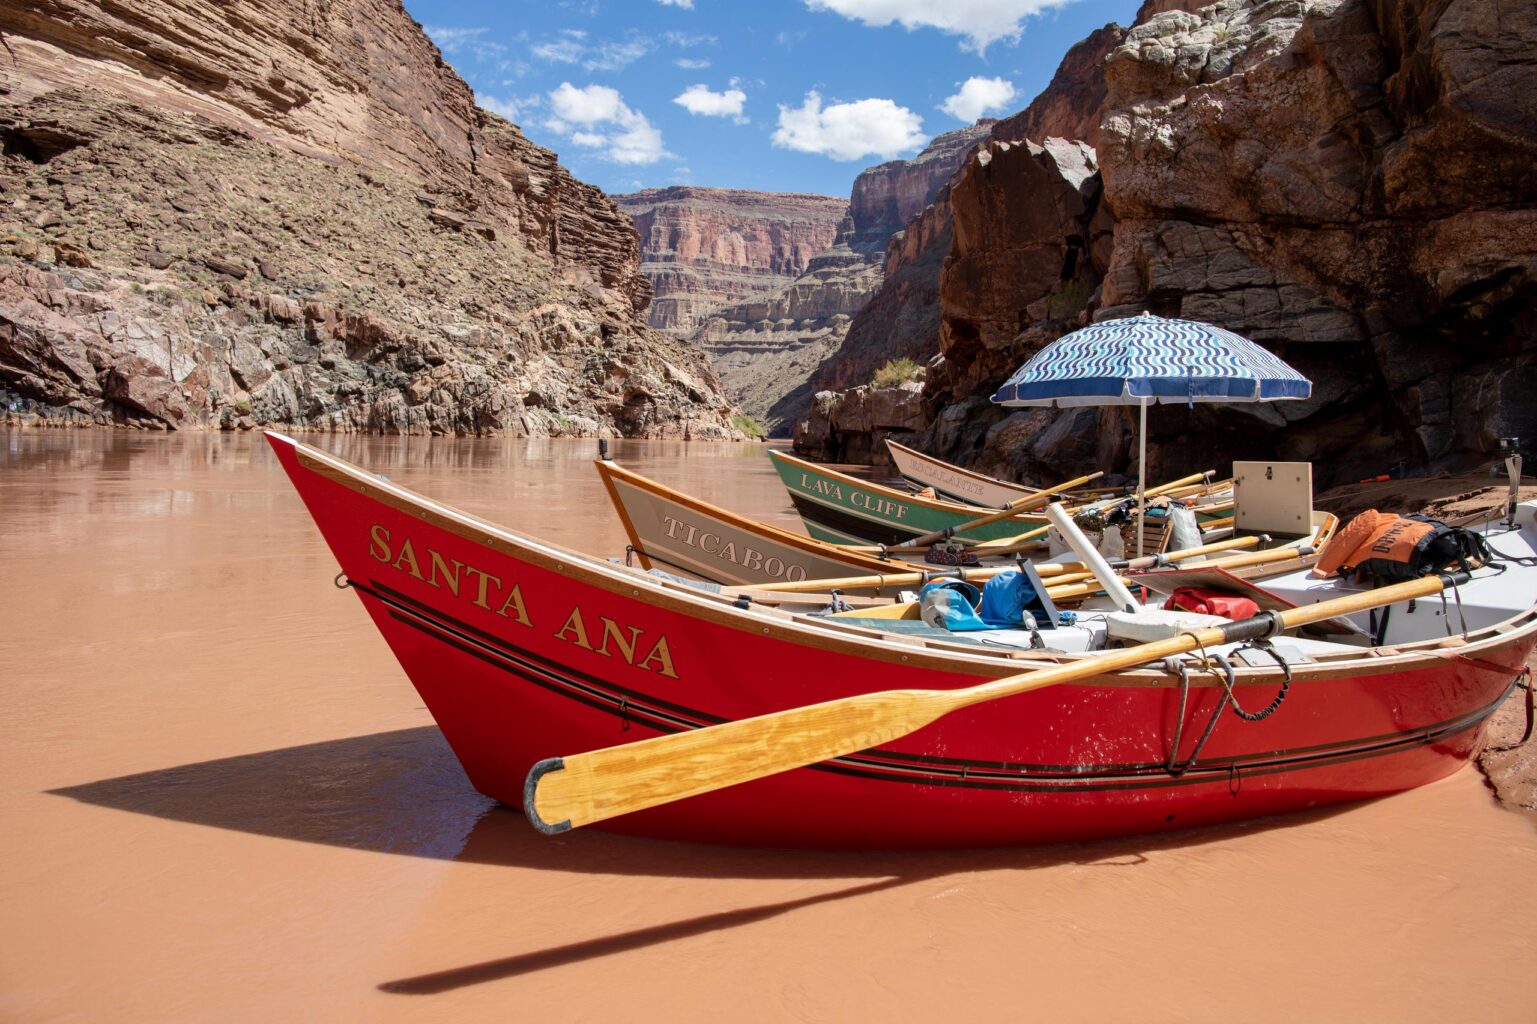 Dories lined up during an OARS Grand Canyon trip